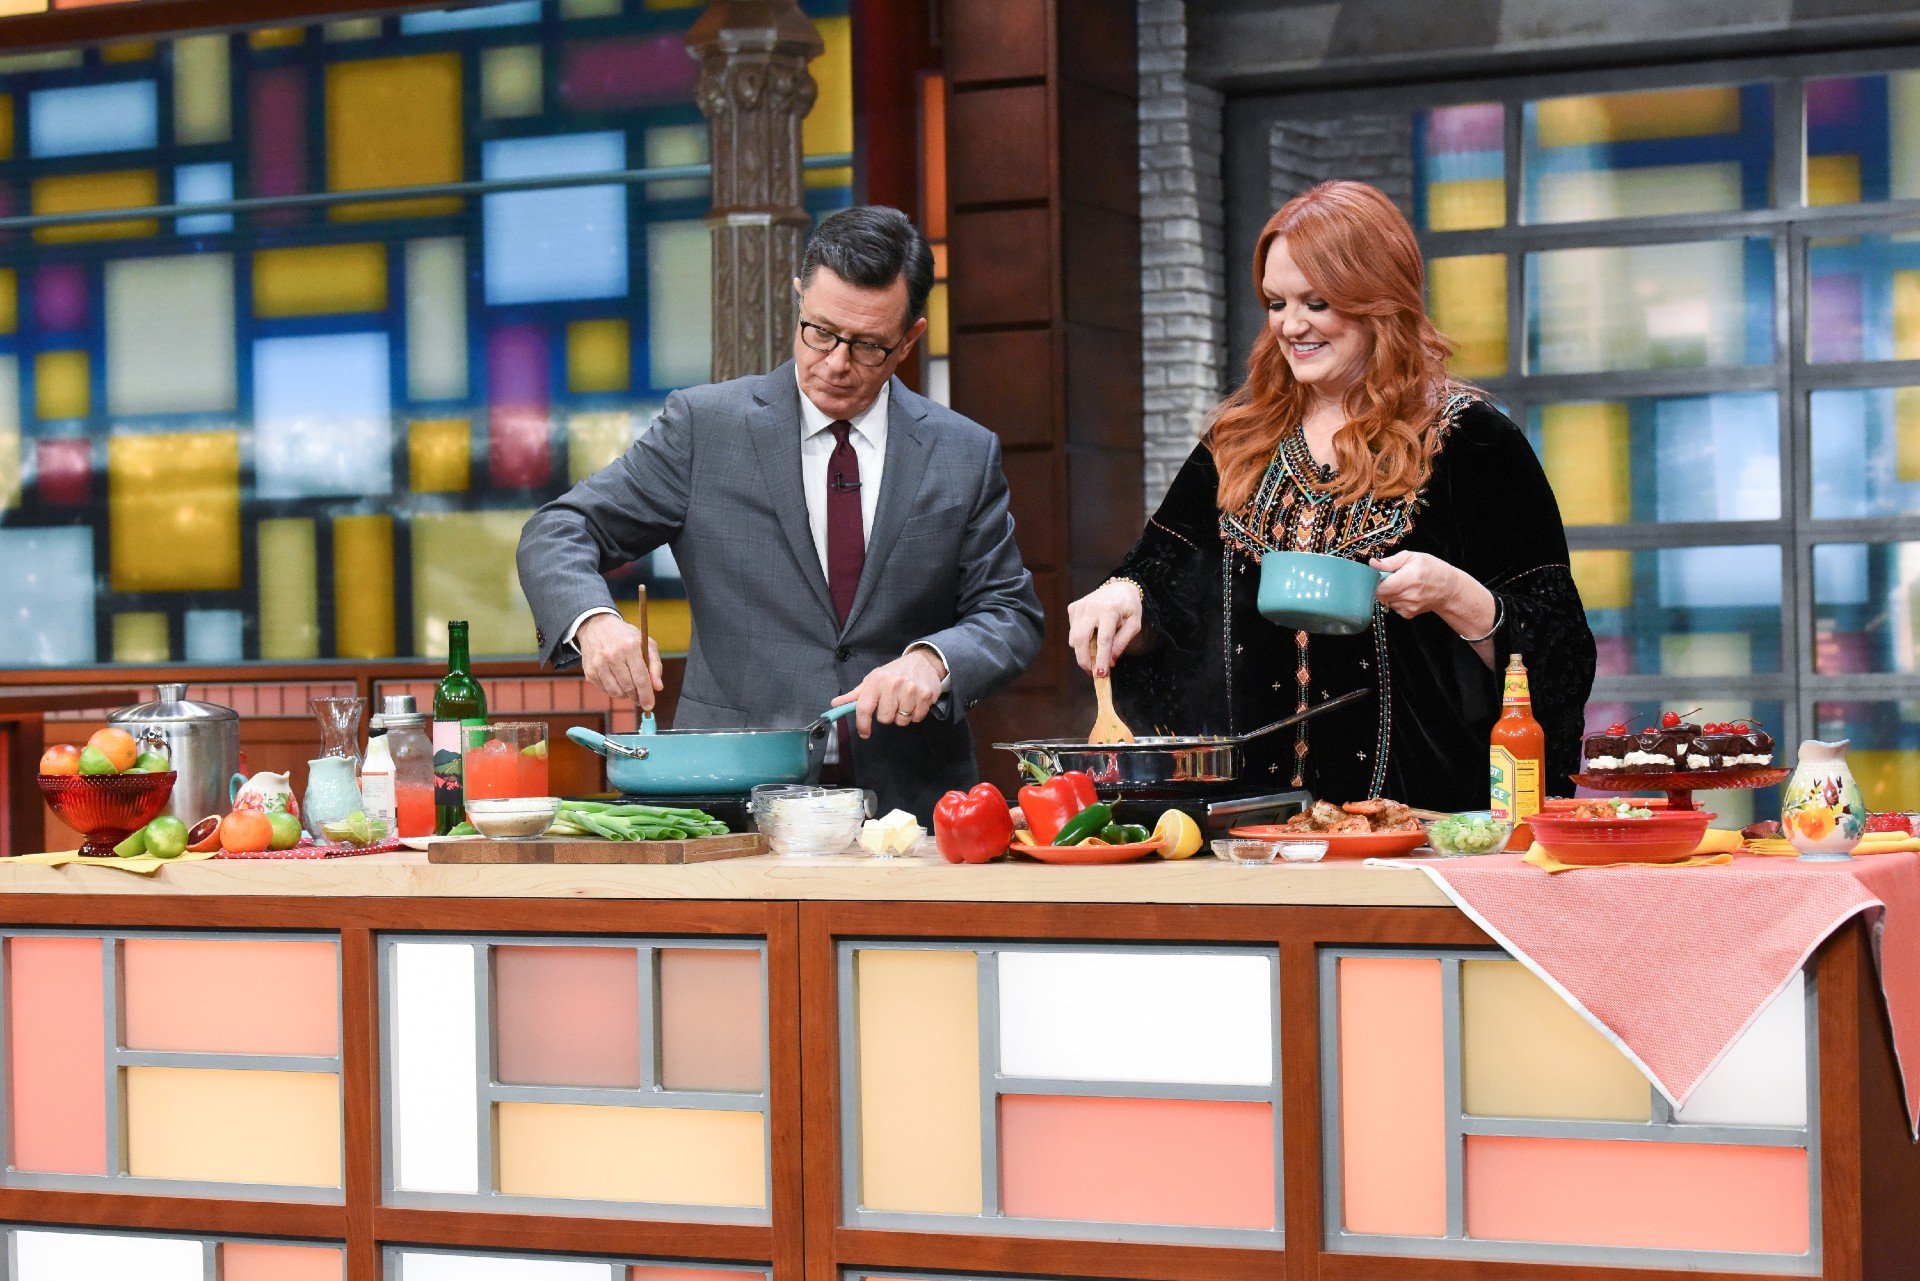 Ree Drummond smiles while wearing a black top and holds a blue pot while Stephen Colbert stirs food